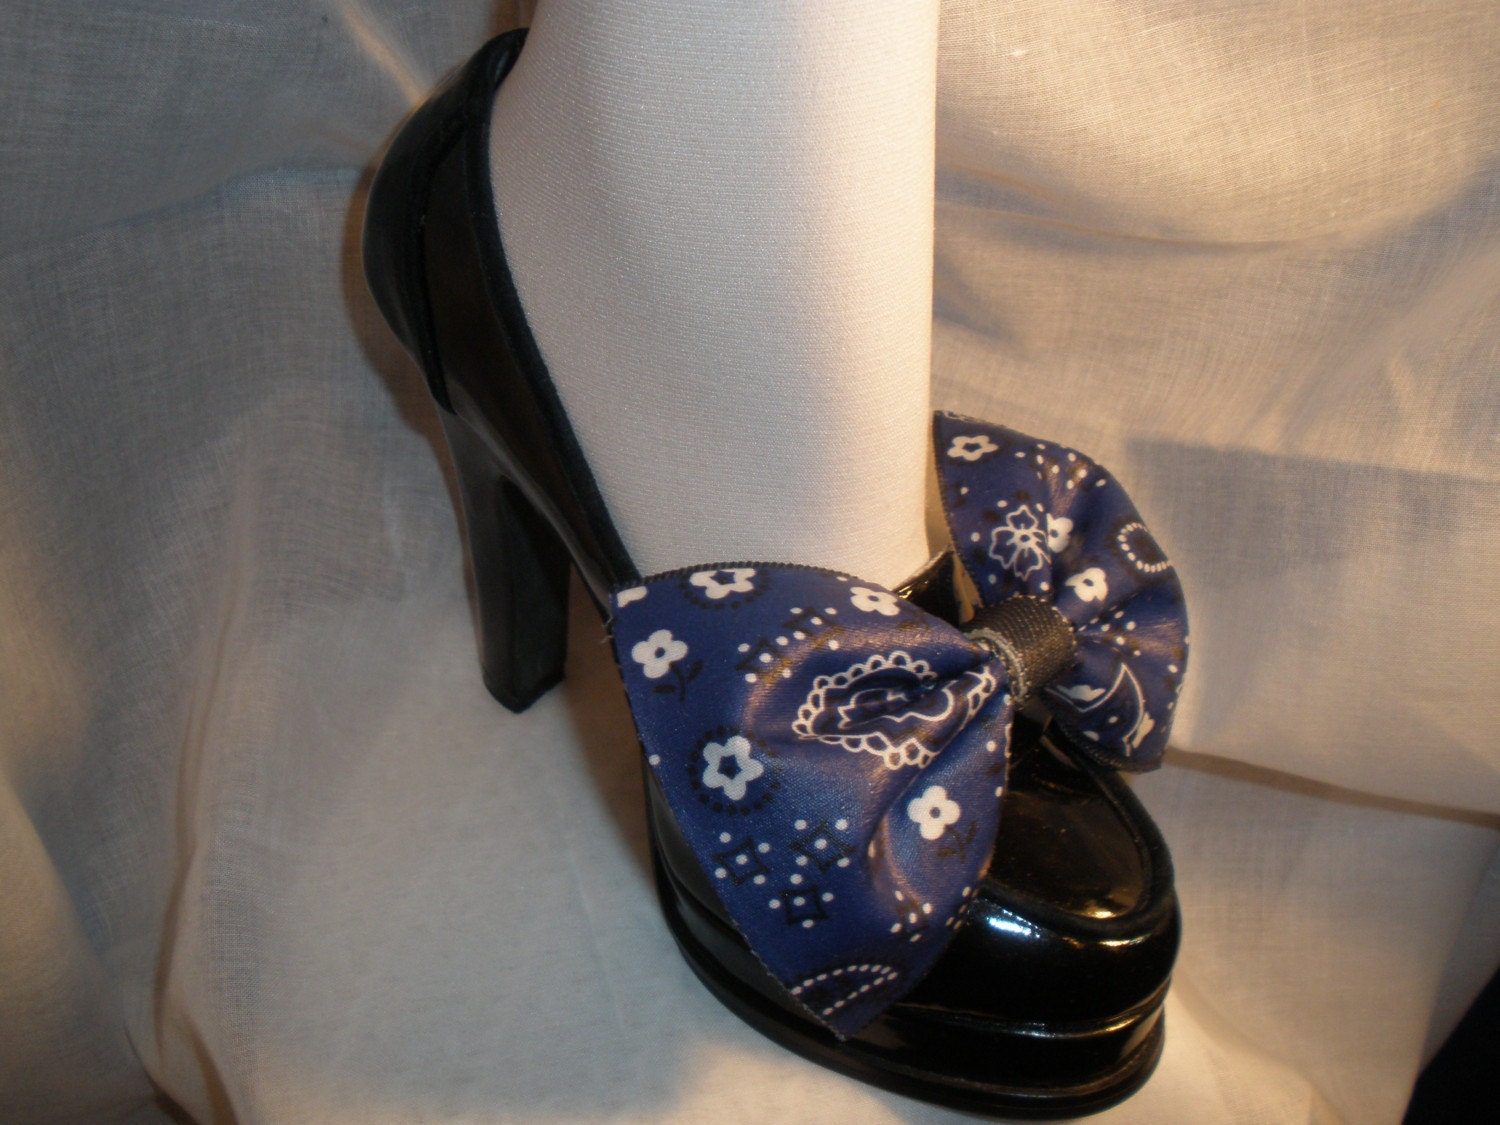 Just So Cute Bow Shoe Wrap Accessories for Your High Heel Shoes Not Shoe Clips